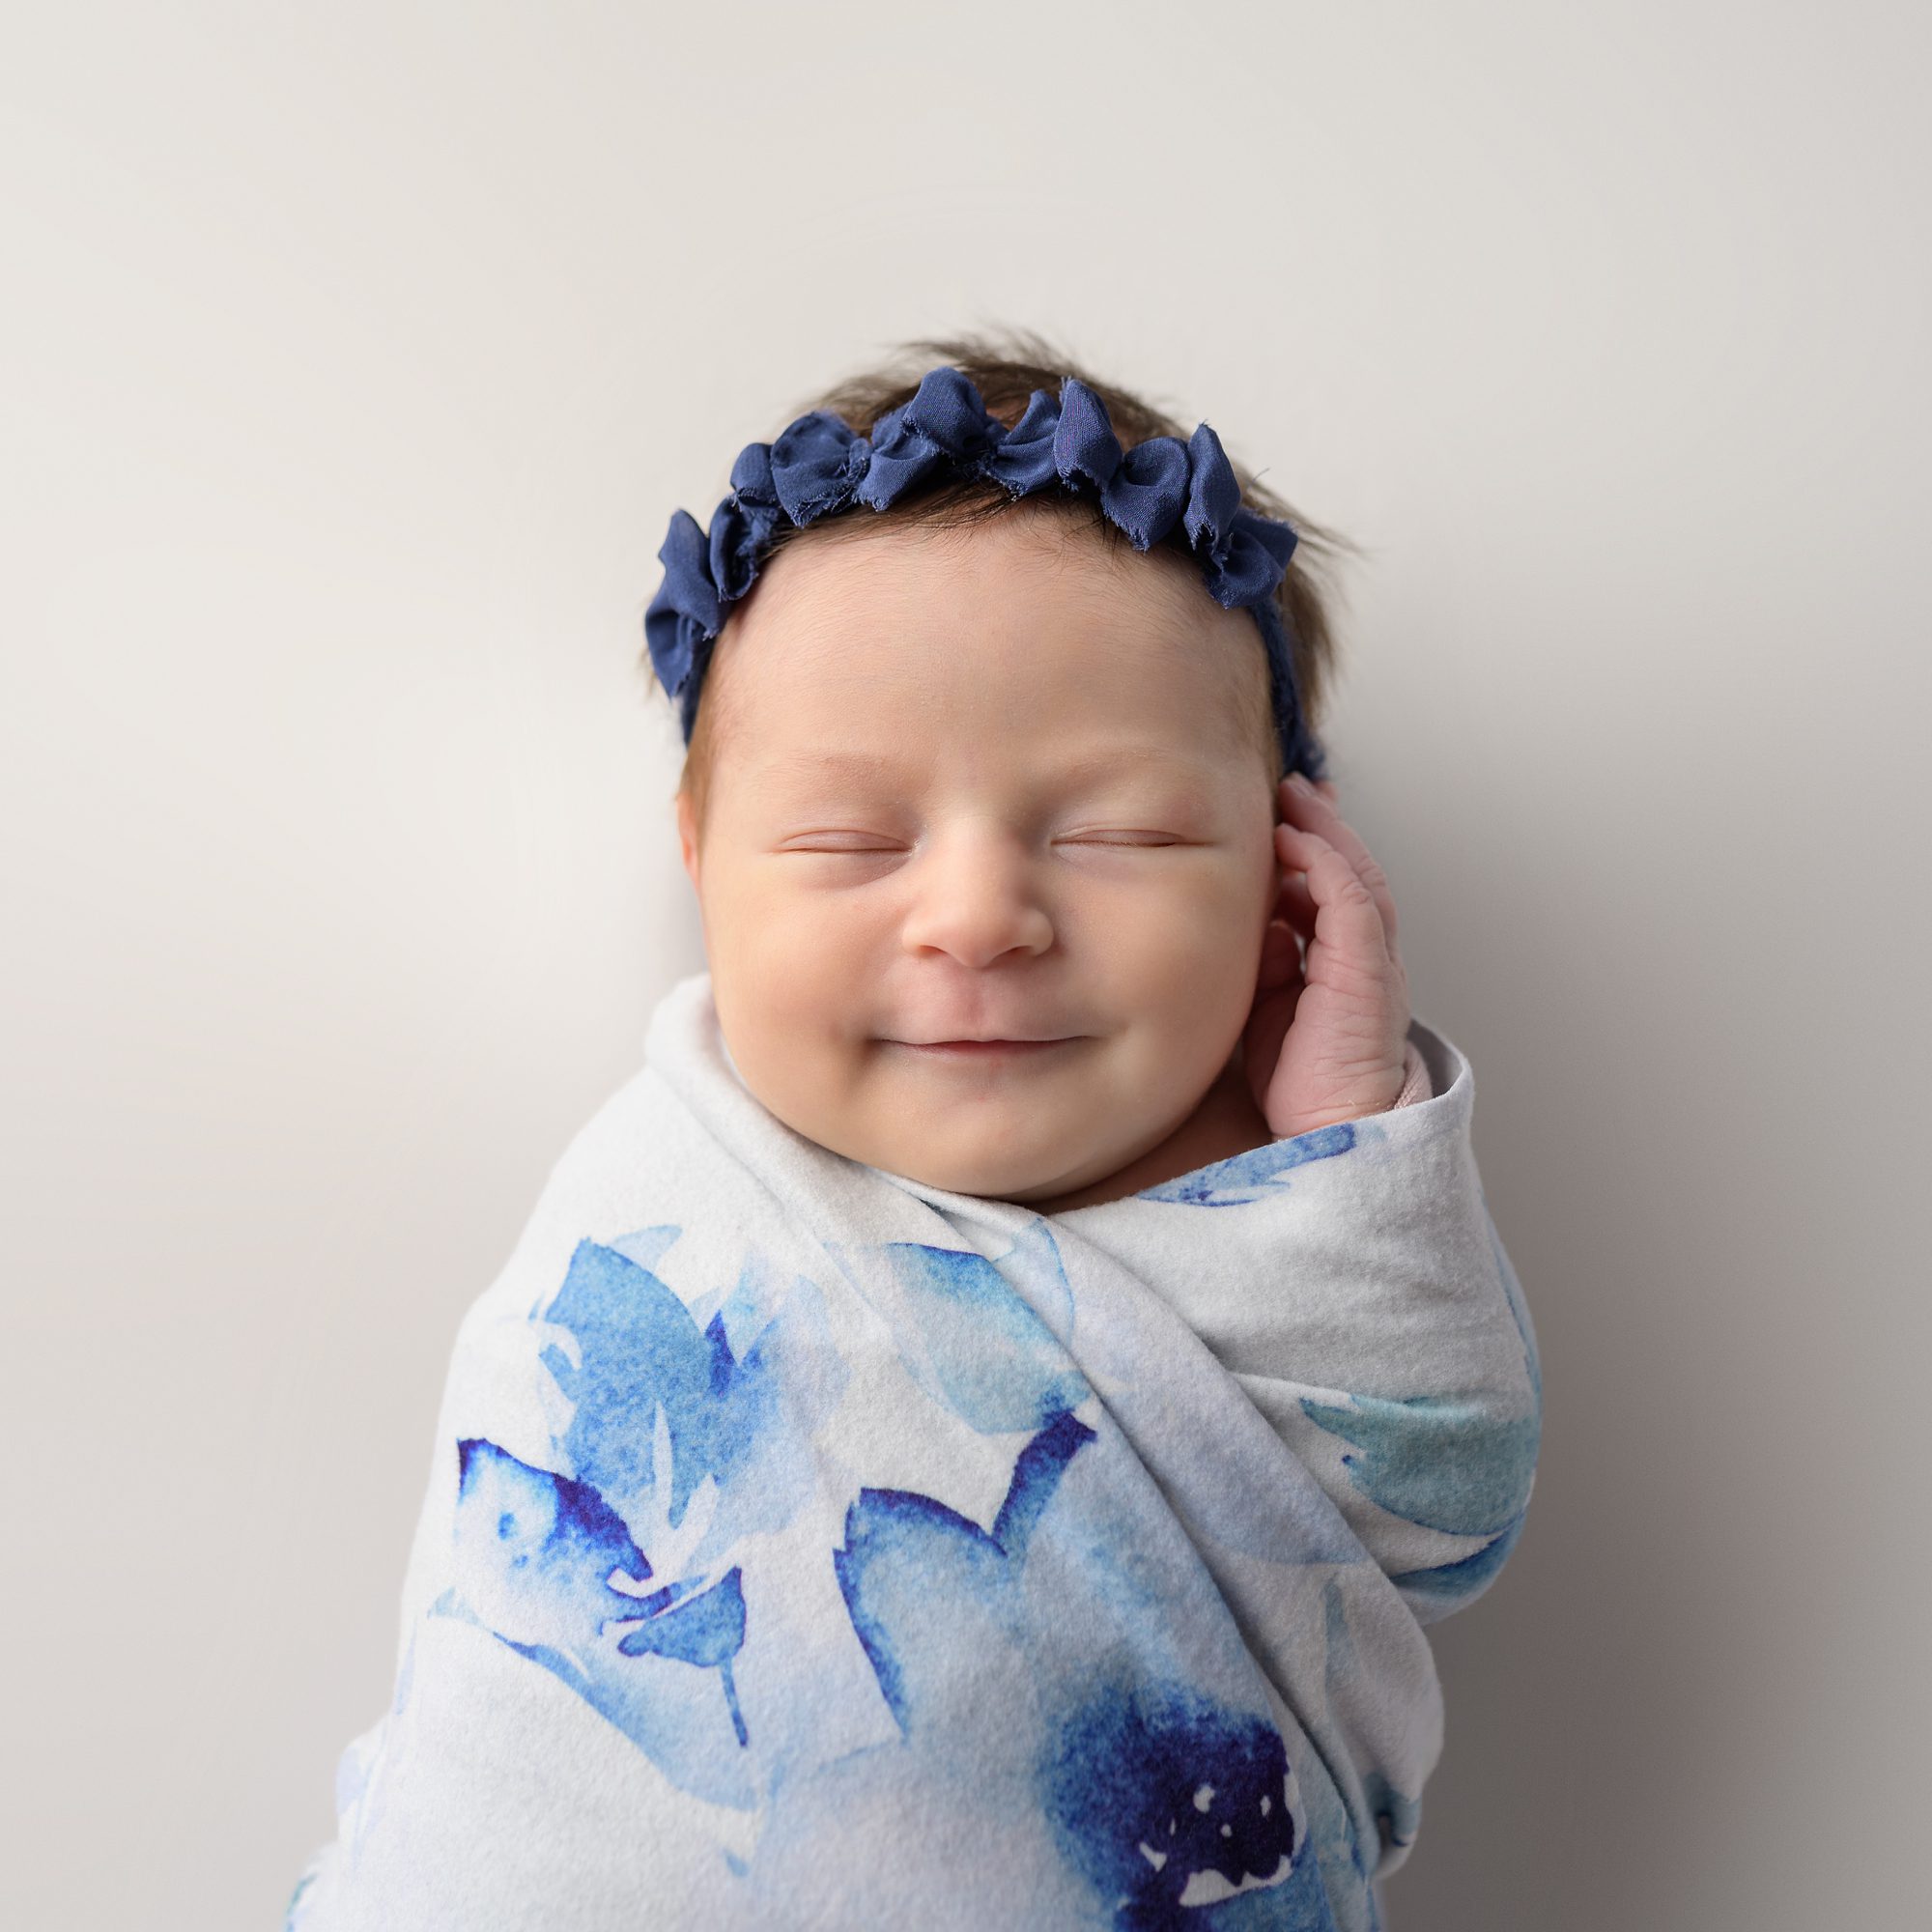 Smiling newborn baby girl, wearing a blue headband and wrapped in a light blue floral swaddle. Photographed by Helen Ransom of Faces You Love in Overland Park.